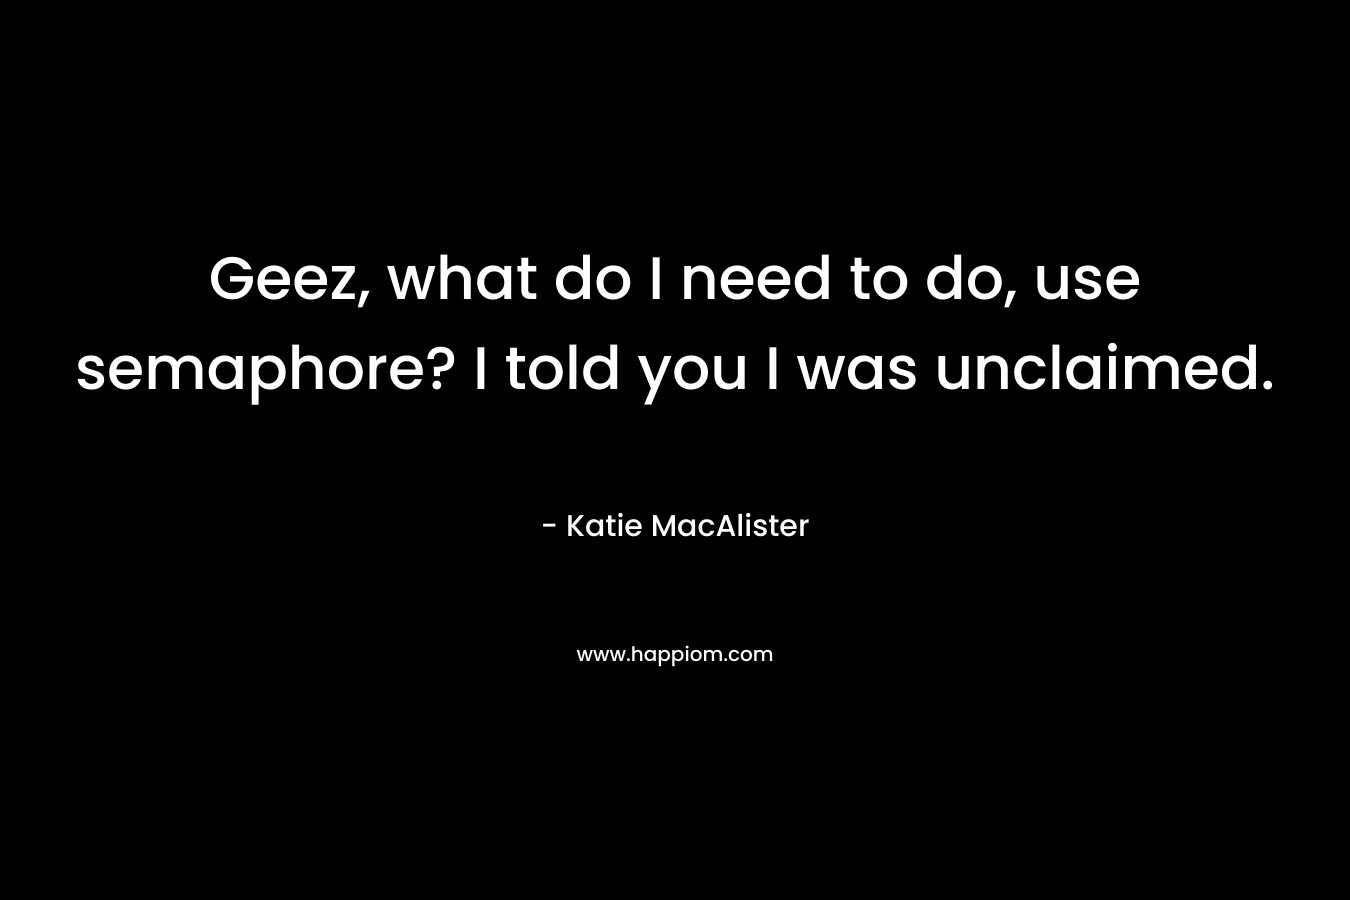 Geez, what do I need to do, use semaphore? I told you I was unclaimed. – Katie MacAlister